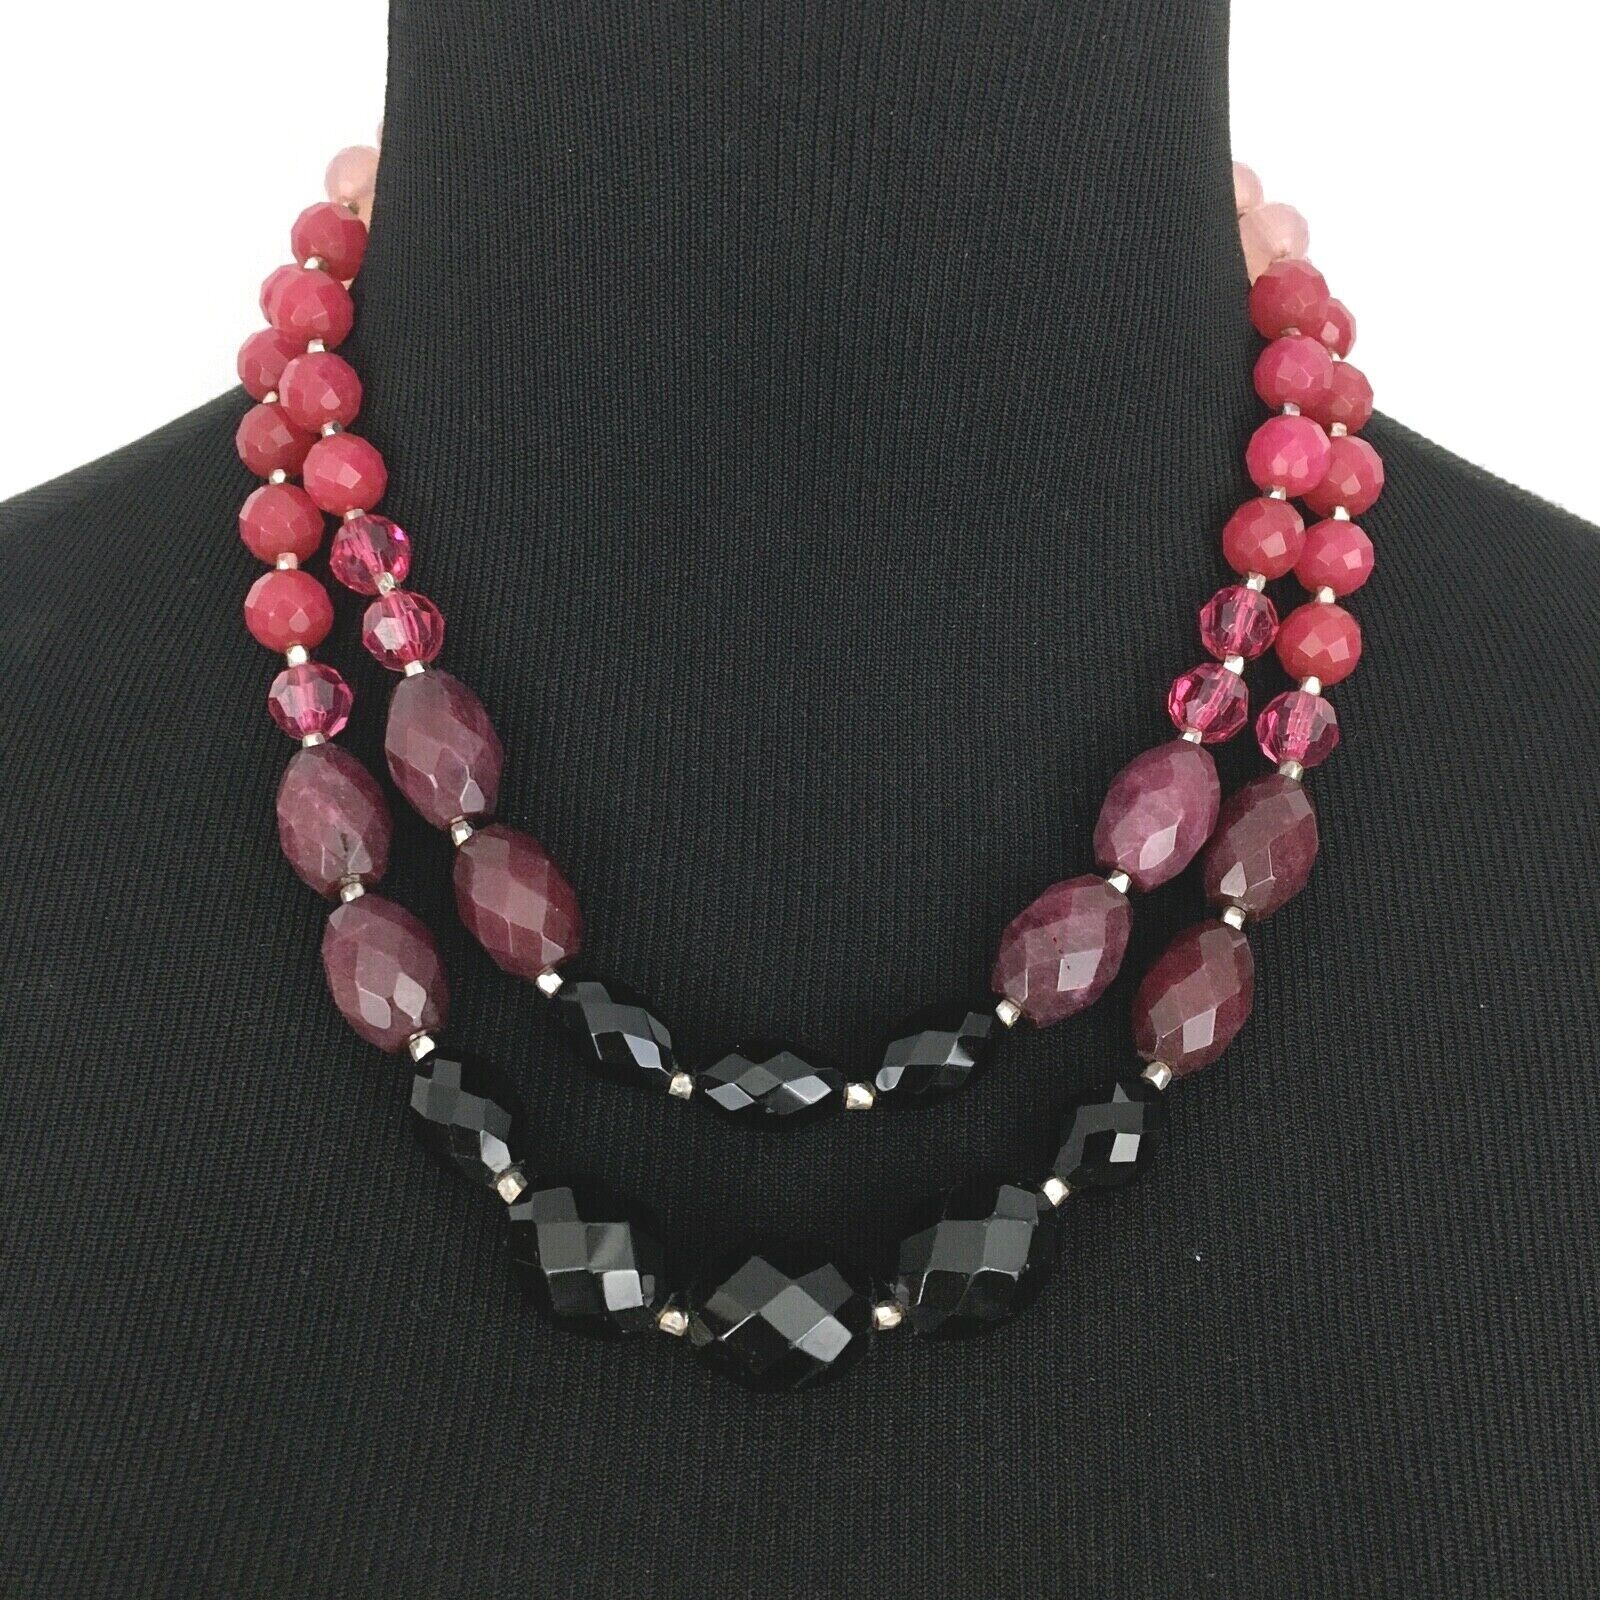 WHBM dyed jade glass multi-strand bead necklace - pink purple black faceted 18" - $20.00